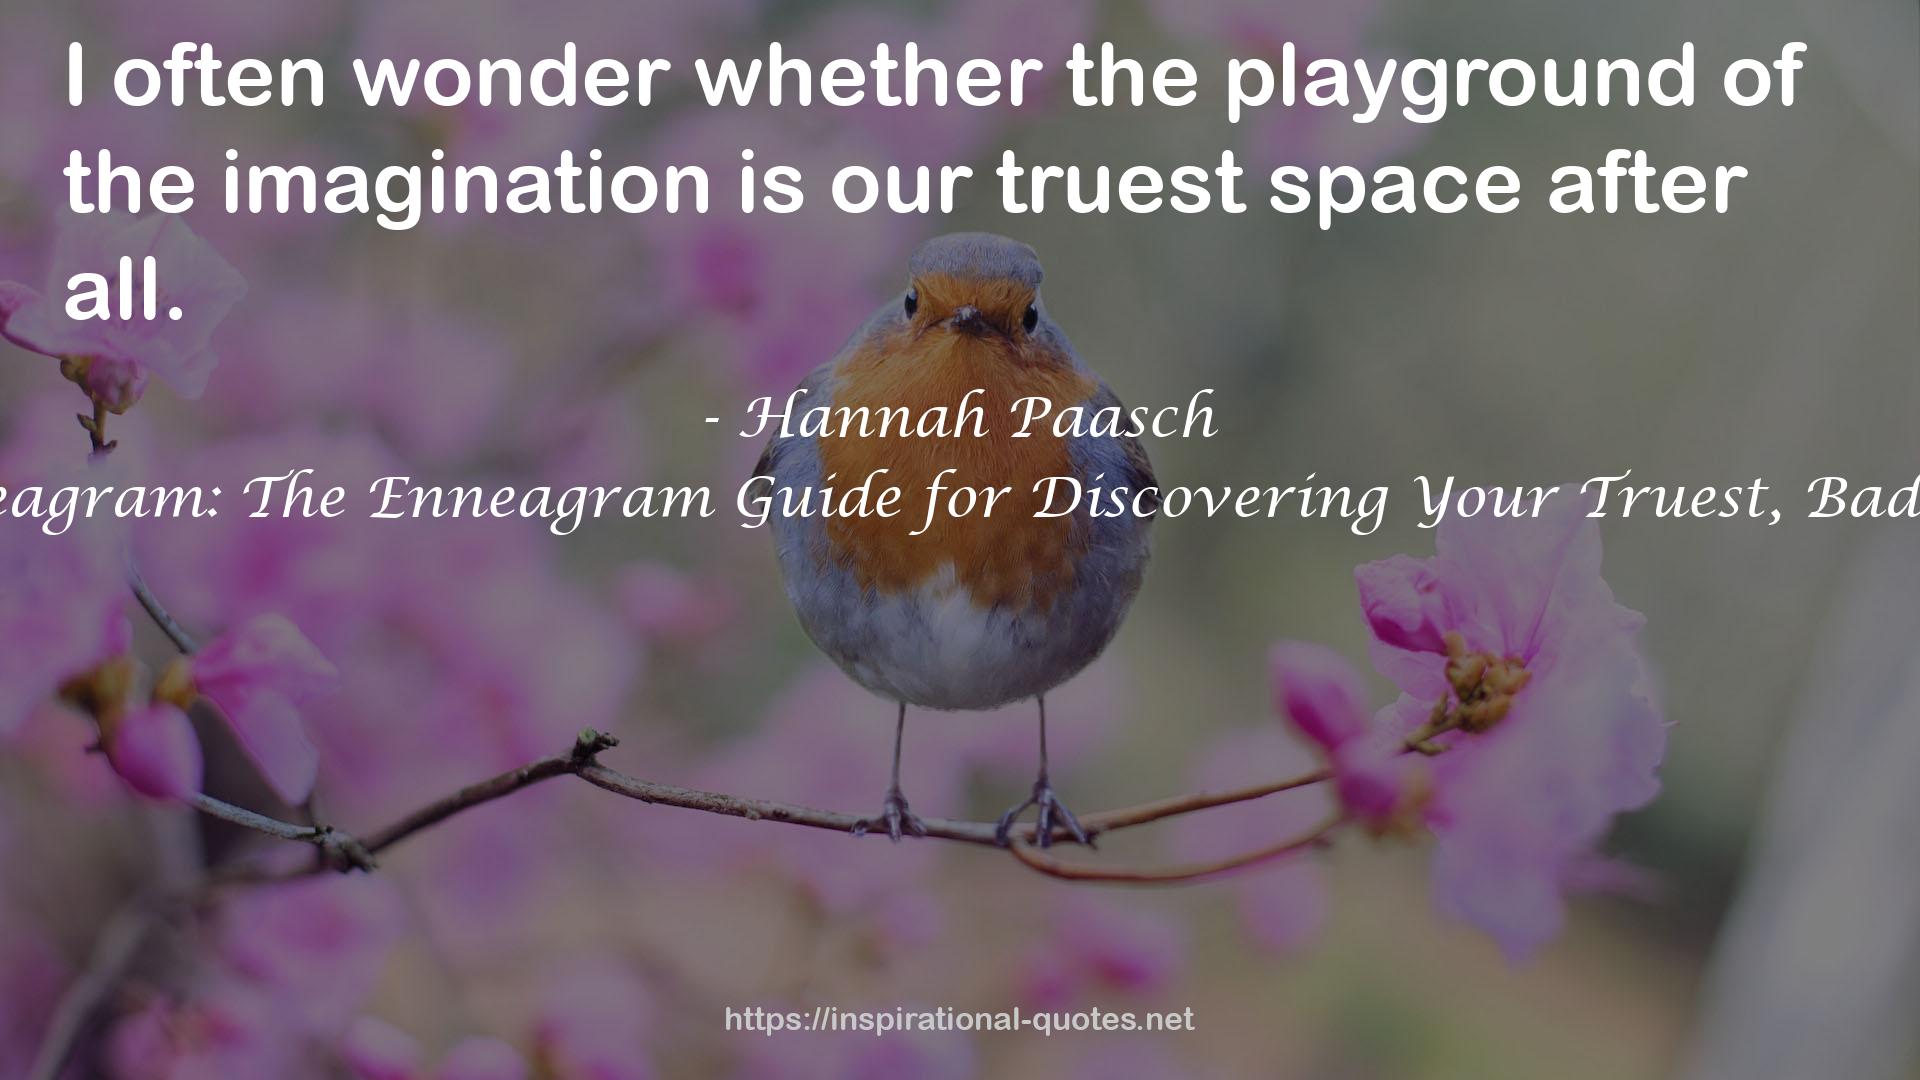 Hannah Paasch QUOTES